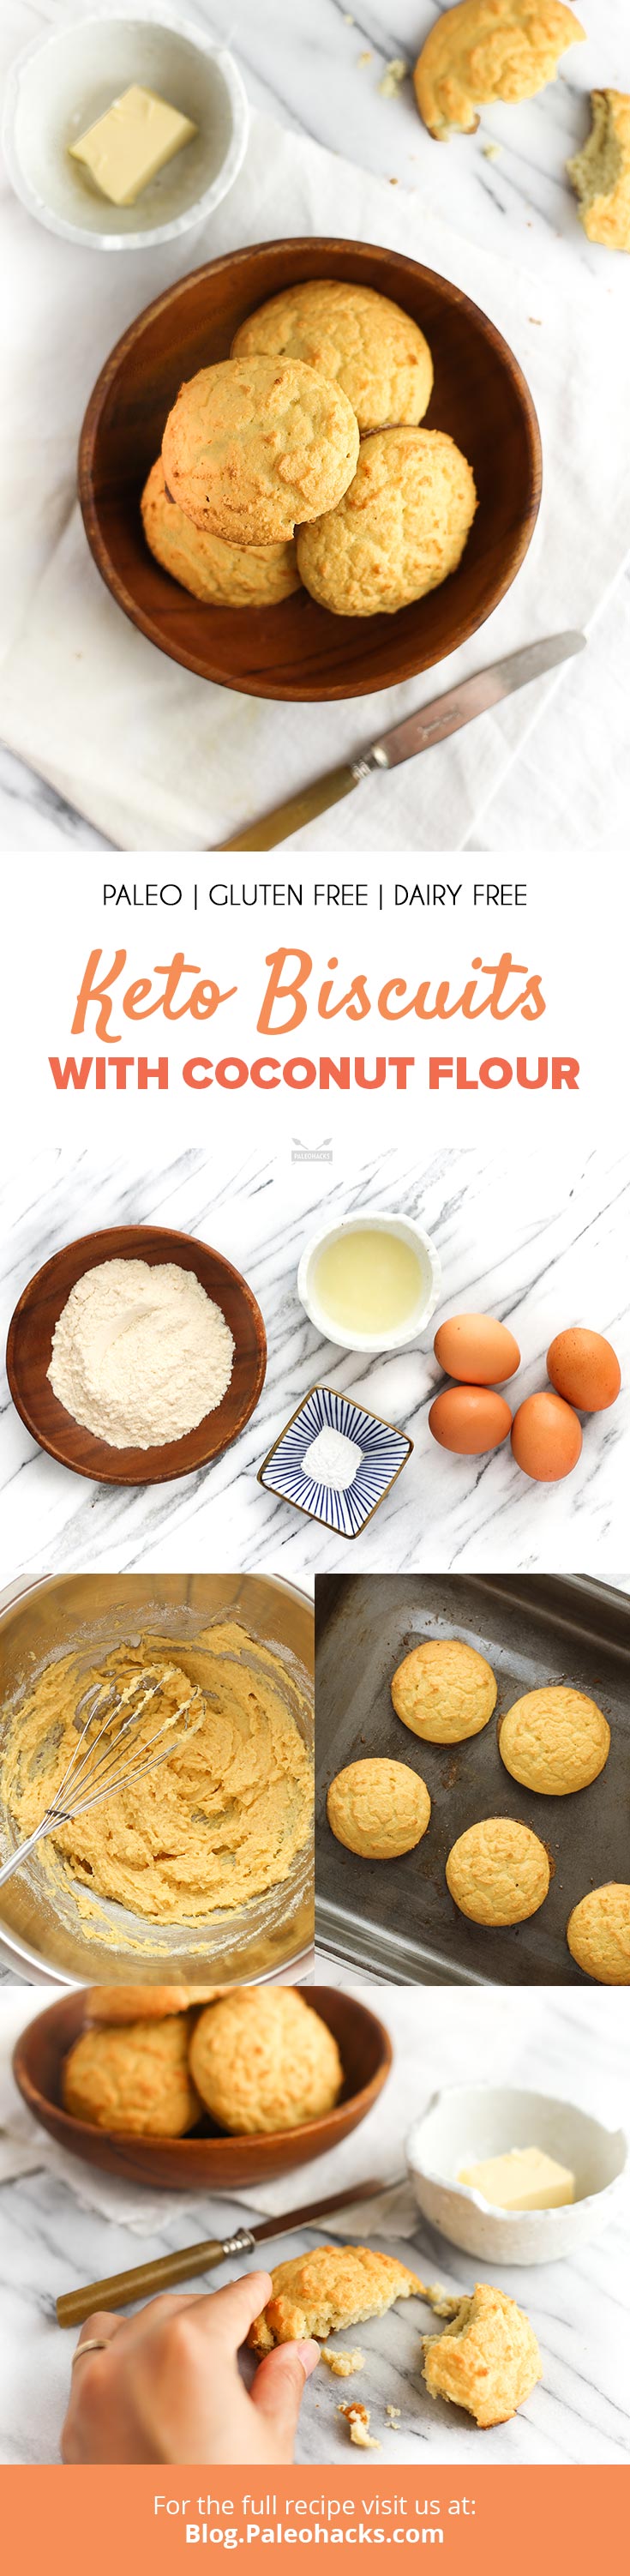 Bake up these golden Keto Biscuits for a grain-free bread you can’t live without. They're like golden clouds of heaven in your mouth!